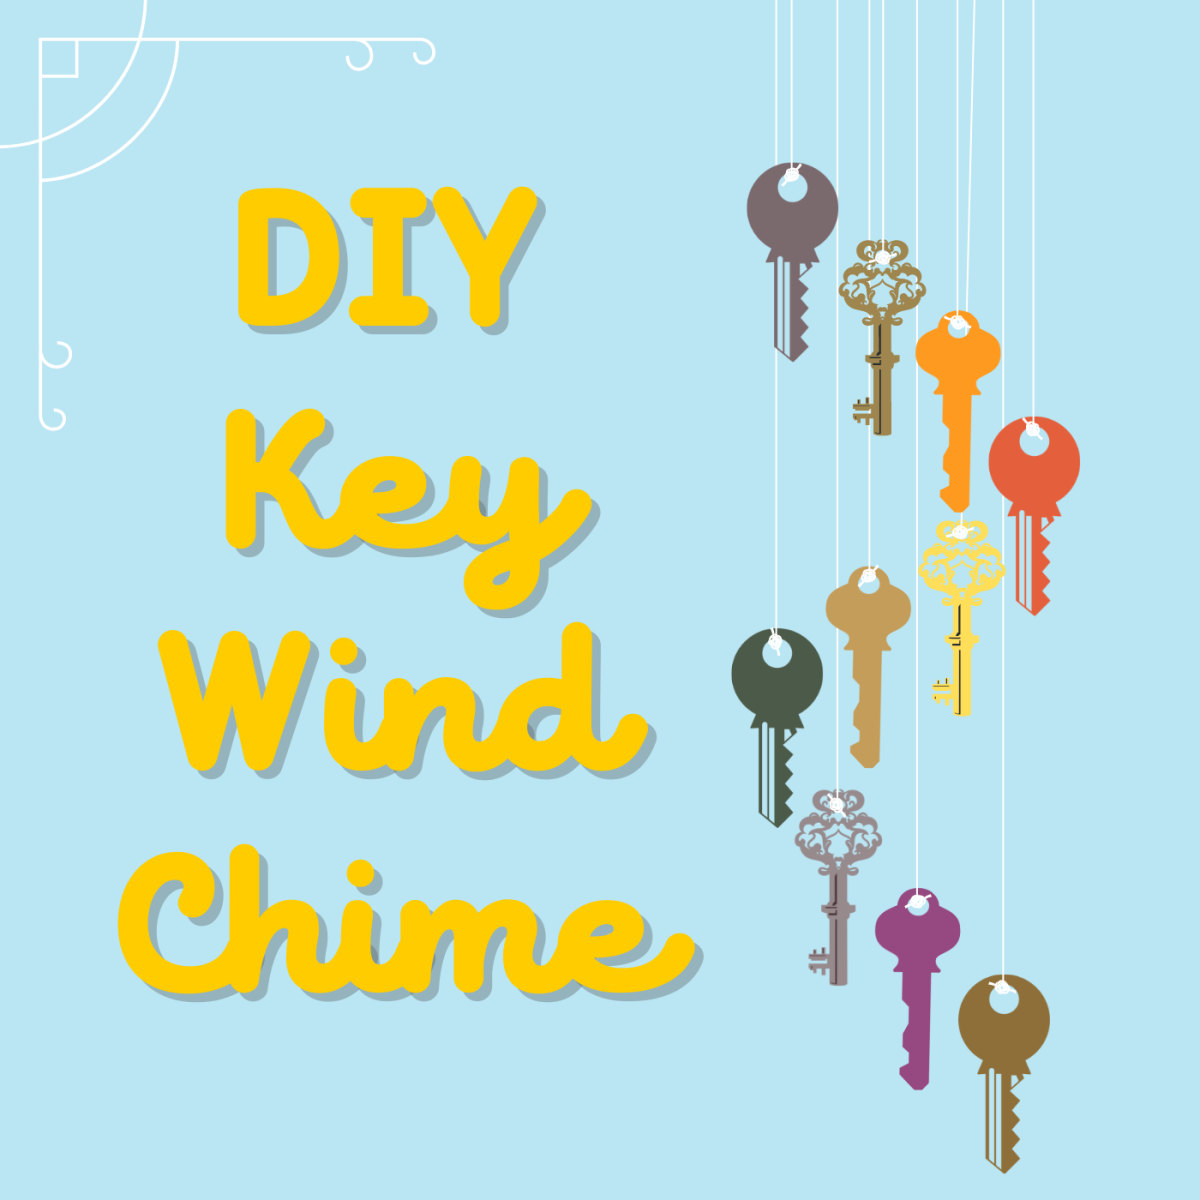 How to Make a Wind Chime With Keys